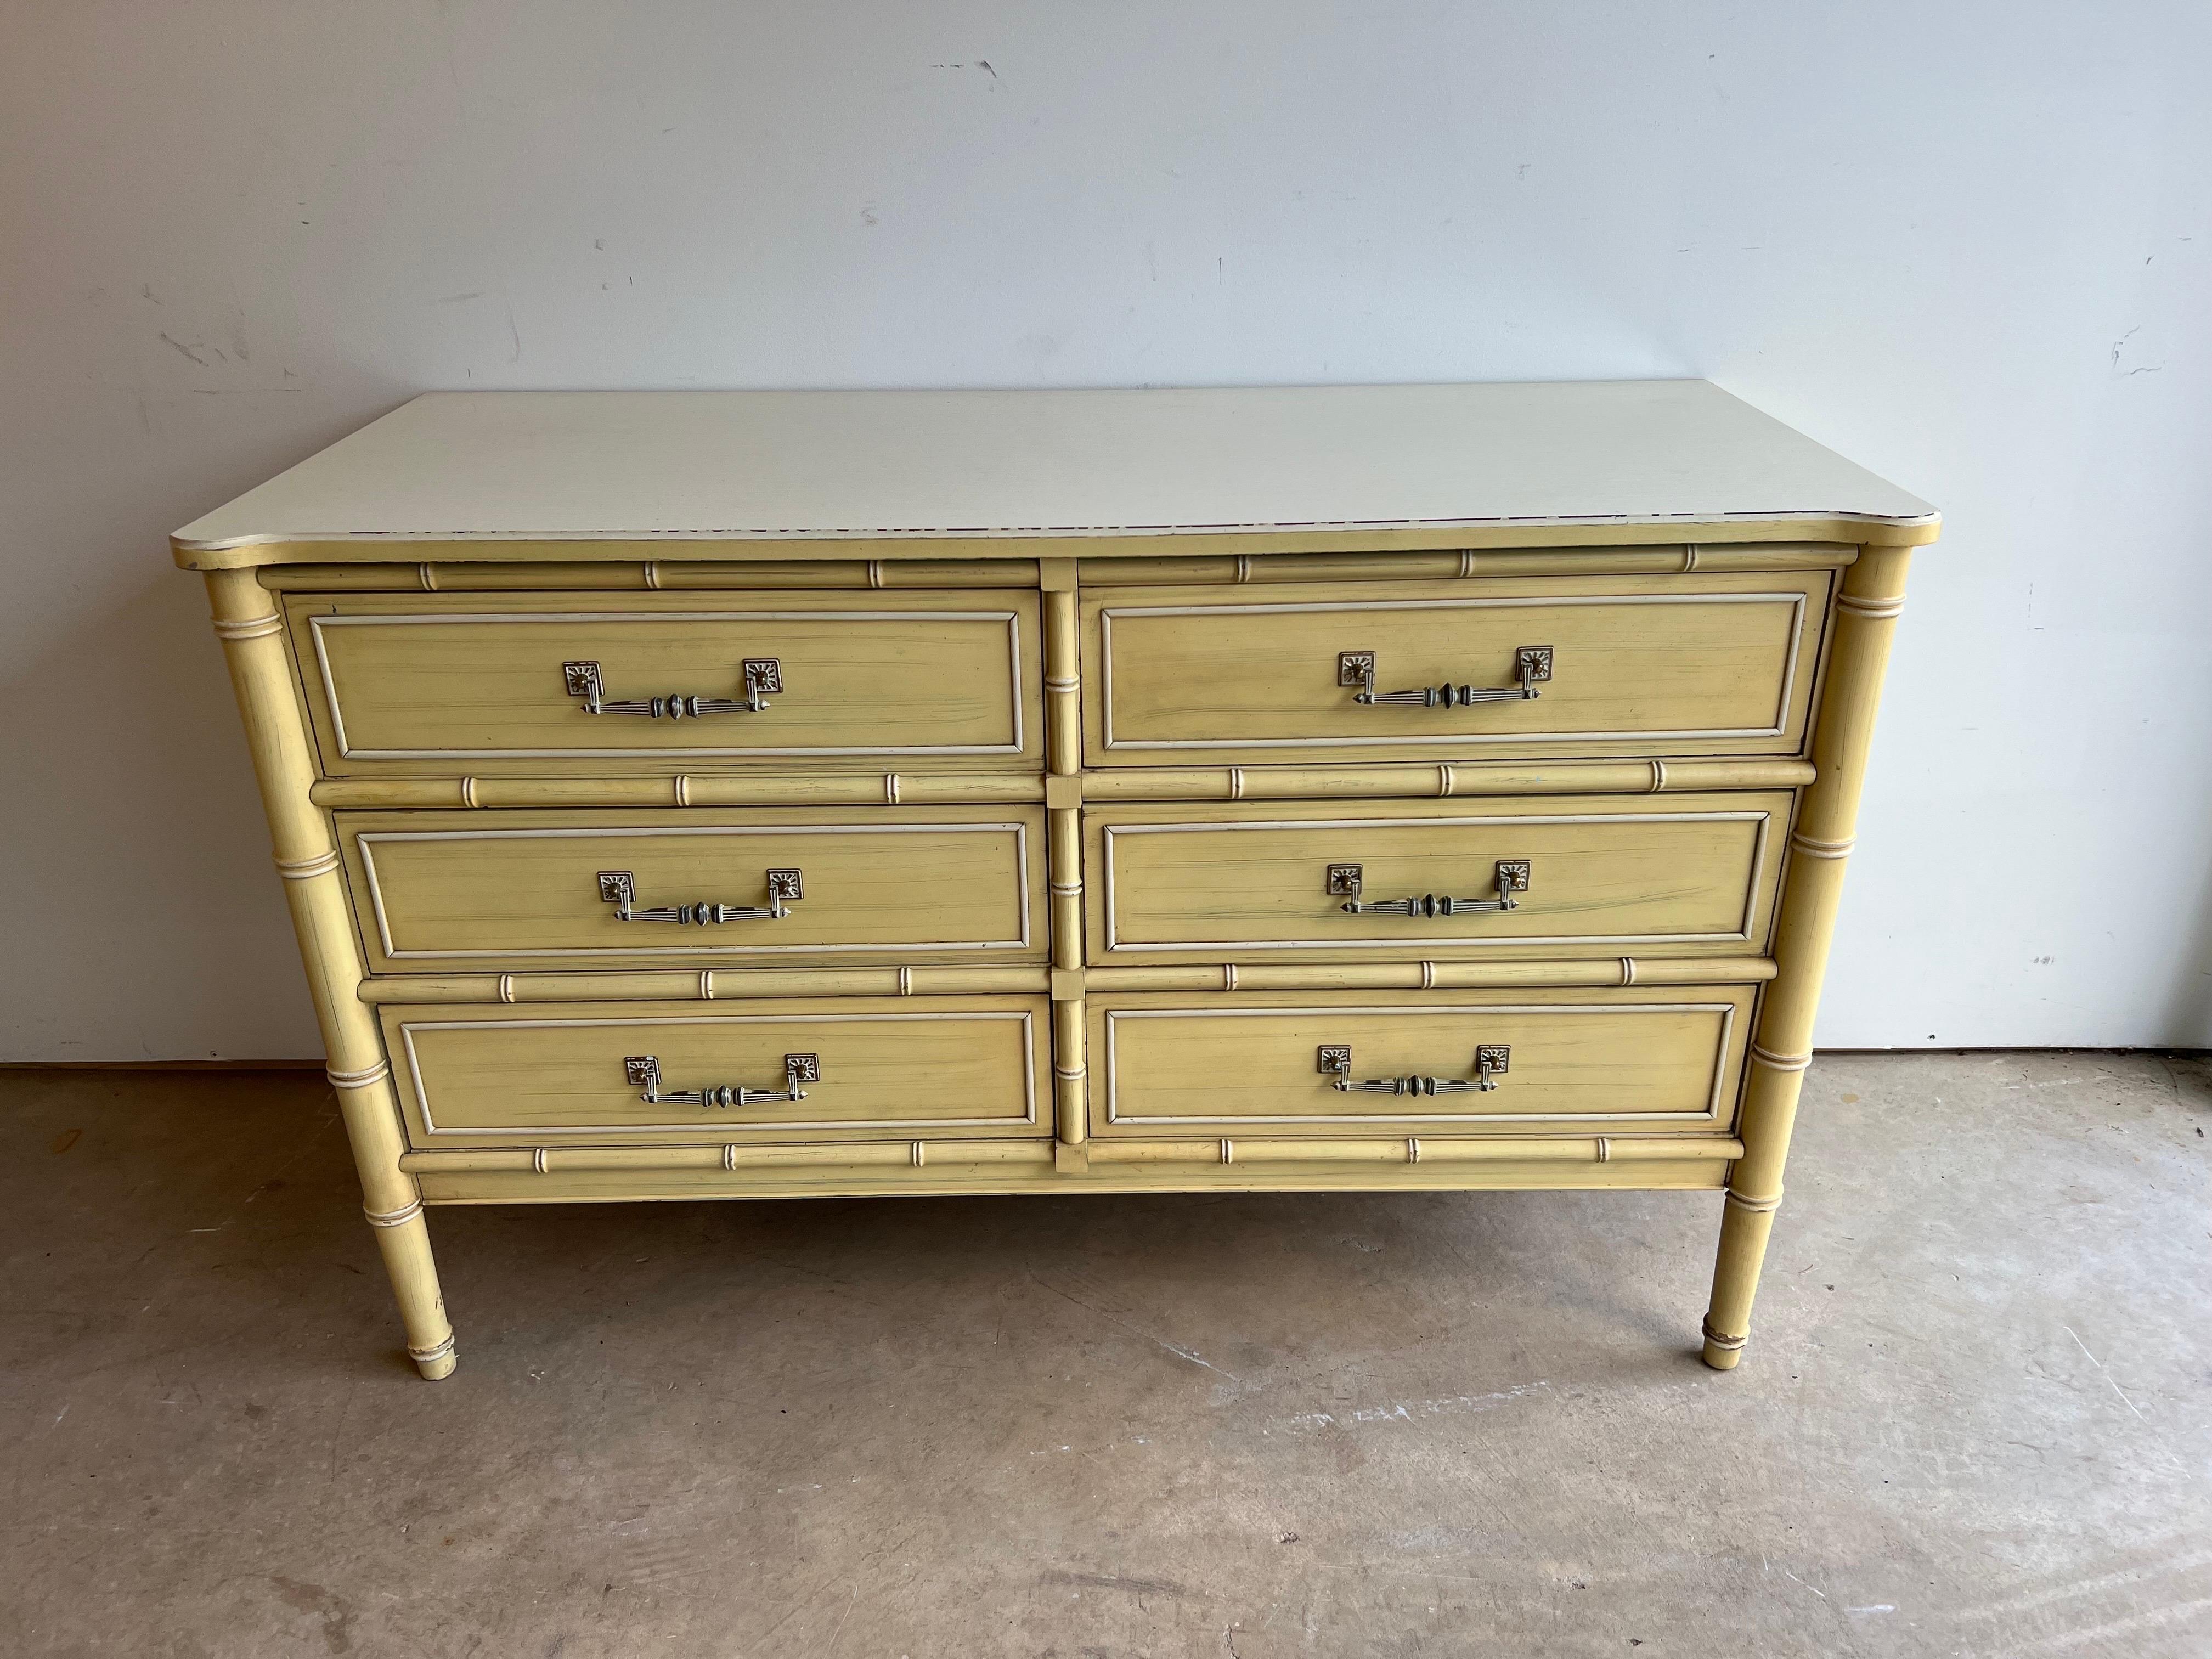 Henry Link Faux Bamboo Dresser in yellow and white. Classic 6 drawer dresser with white laminate top from the Bali Hai collection. Solid wood construction with dovetailed drawers . Nice Faux bamboo accents. Signed in top drawer. Painted finish has